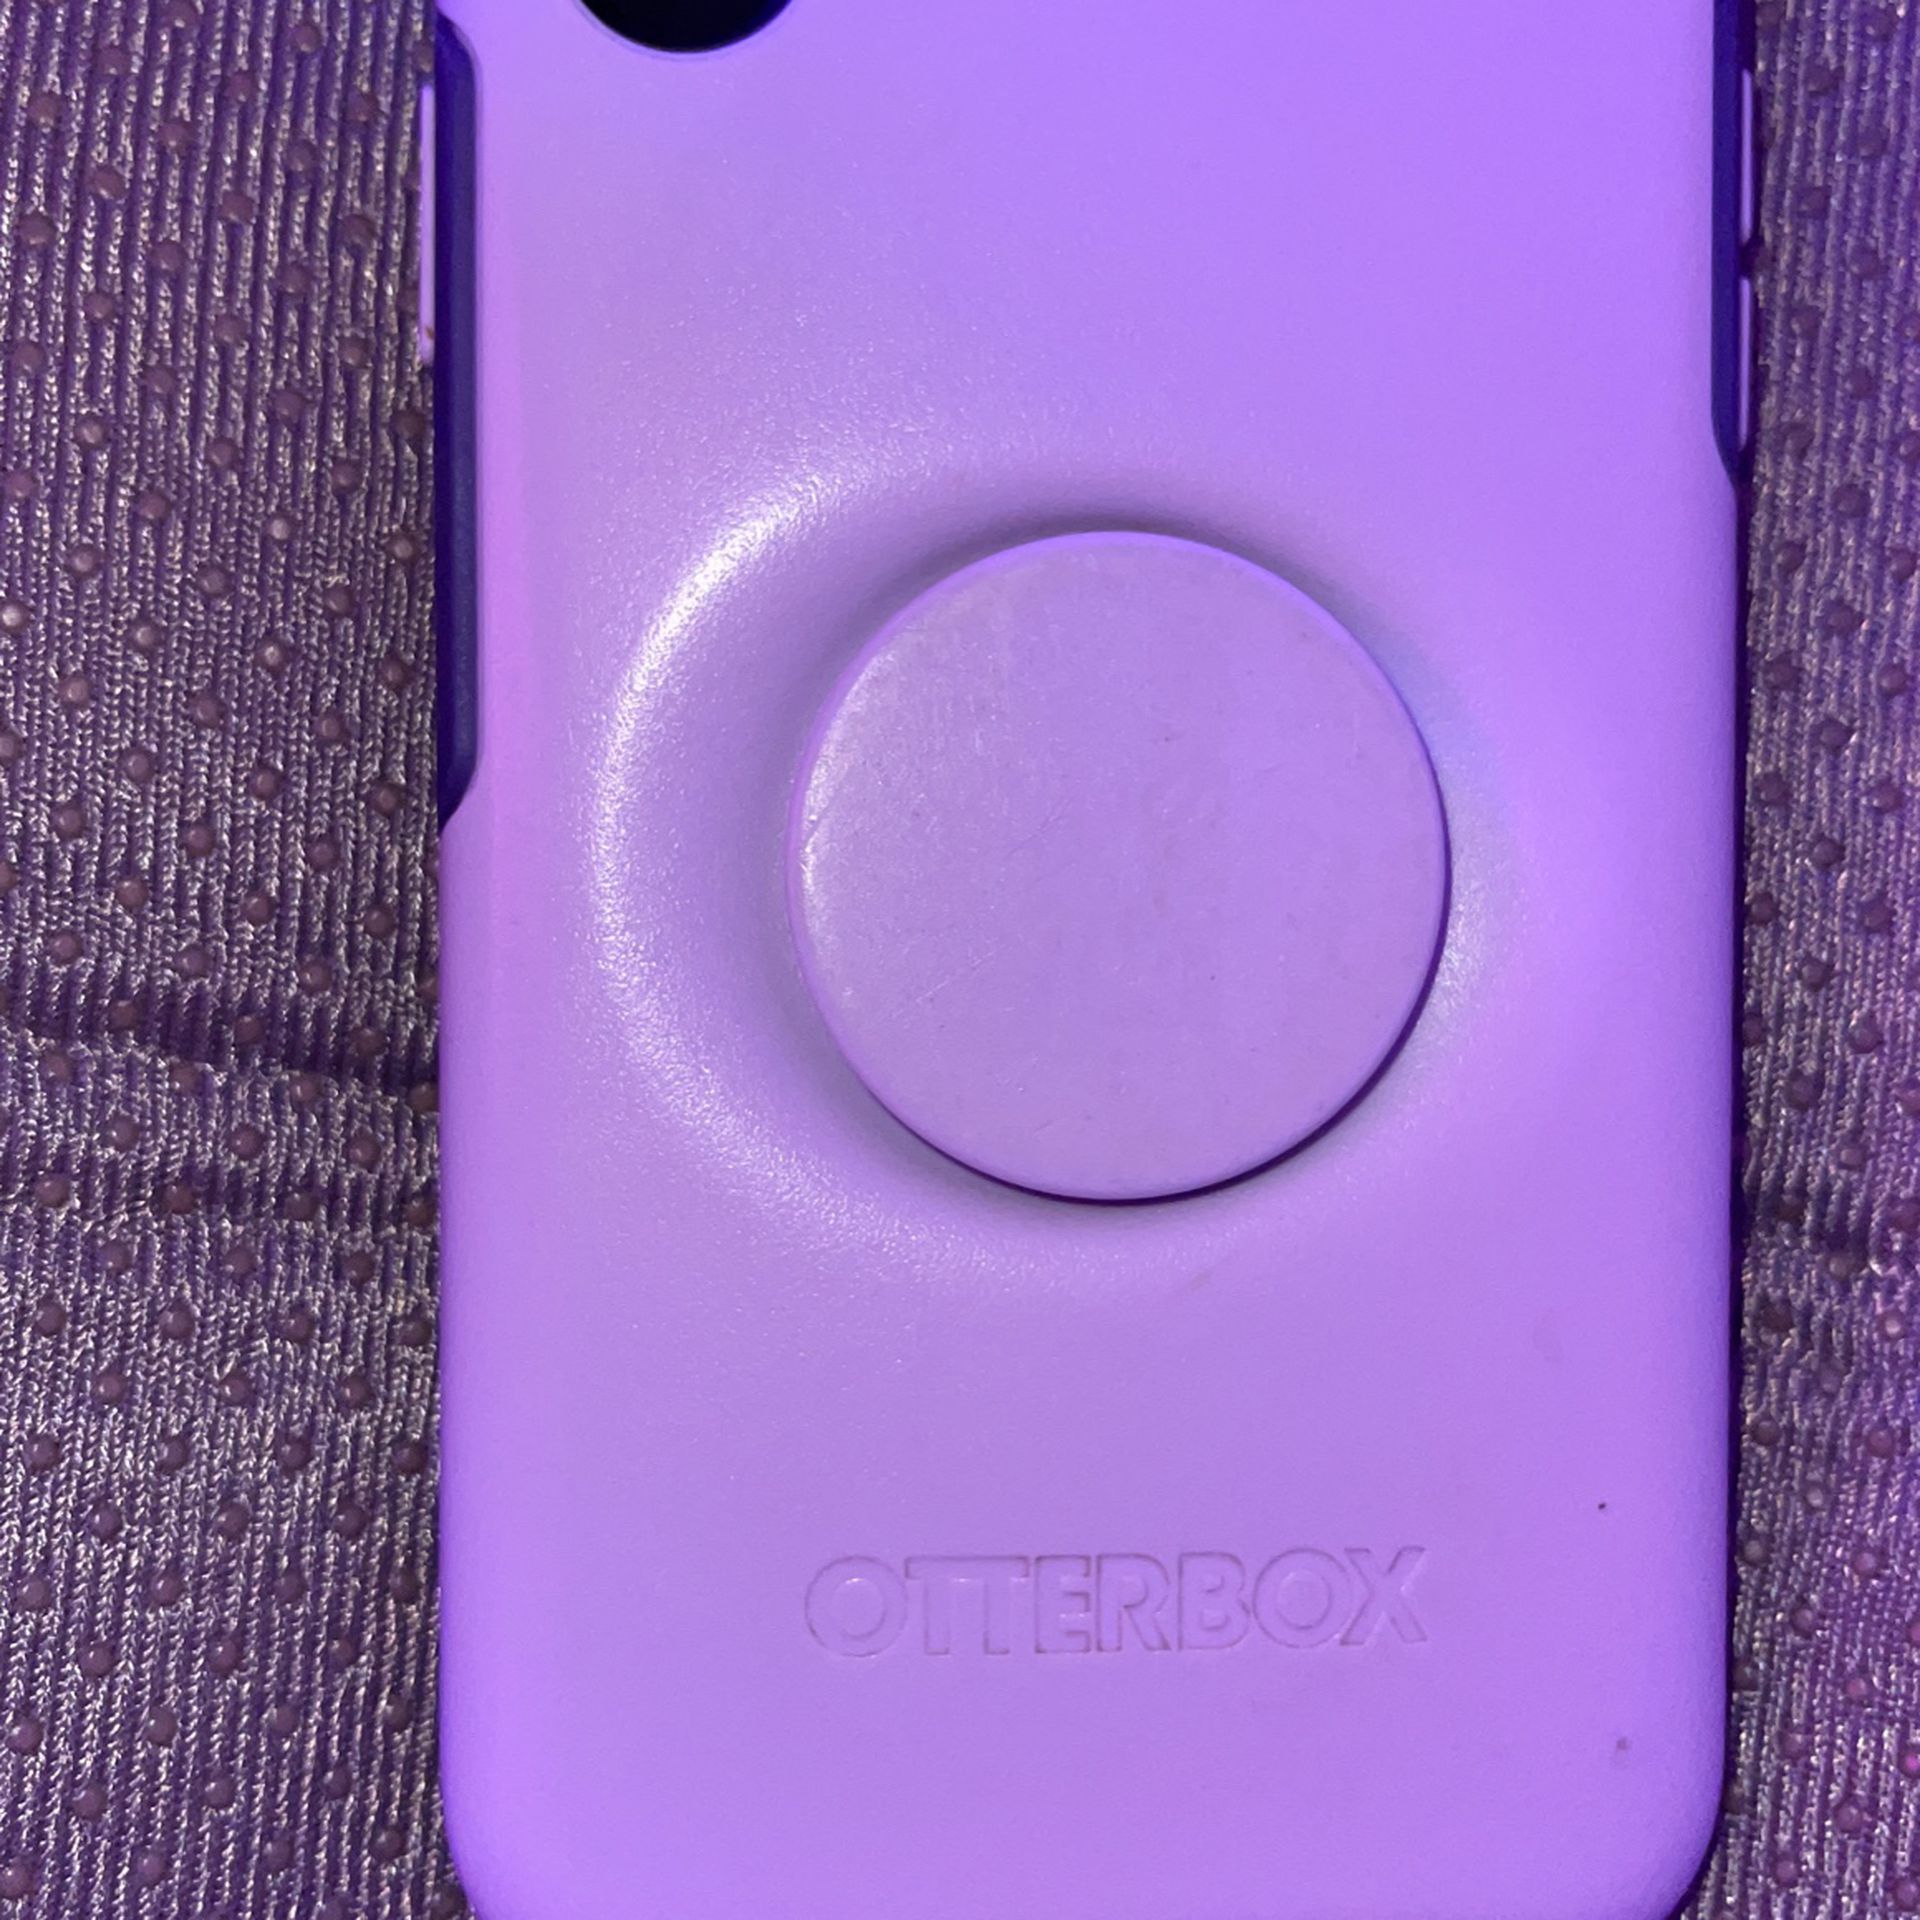 Multi Purple Otter Box For iPhone XR